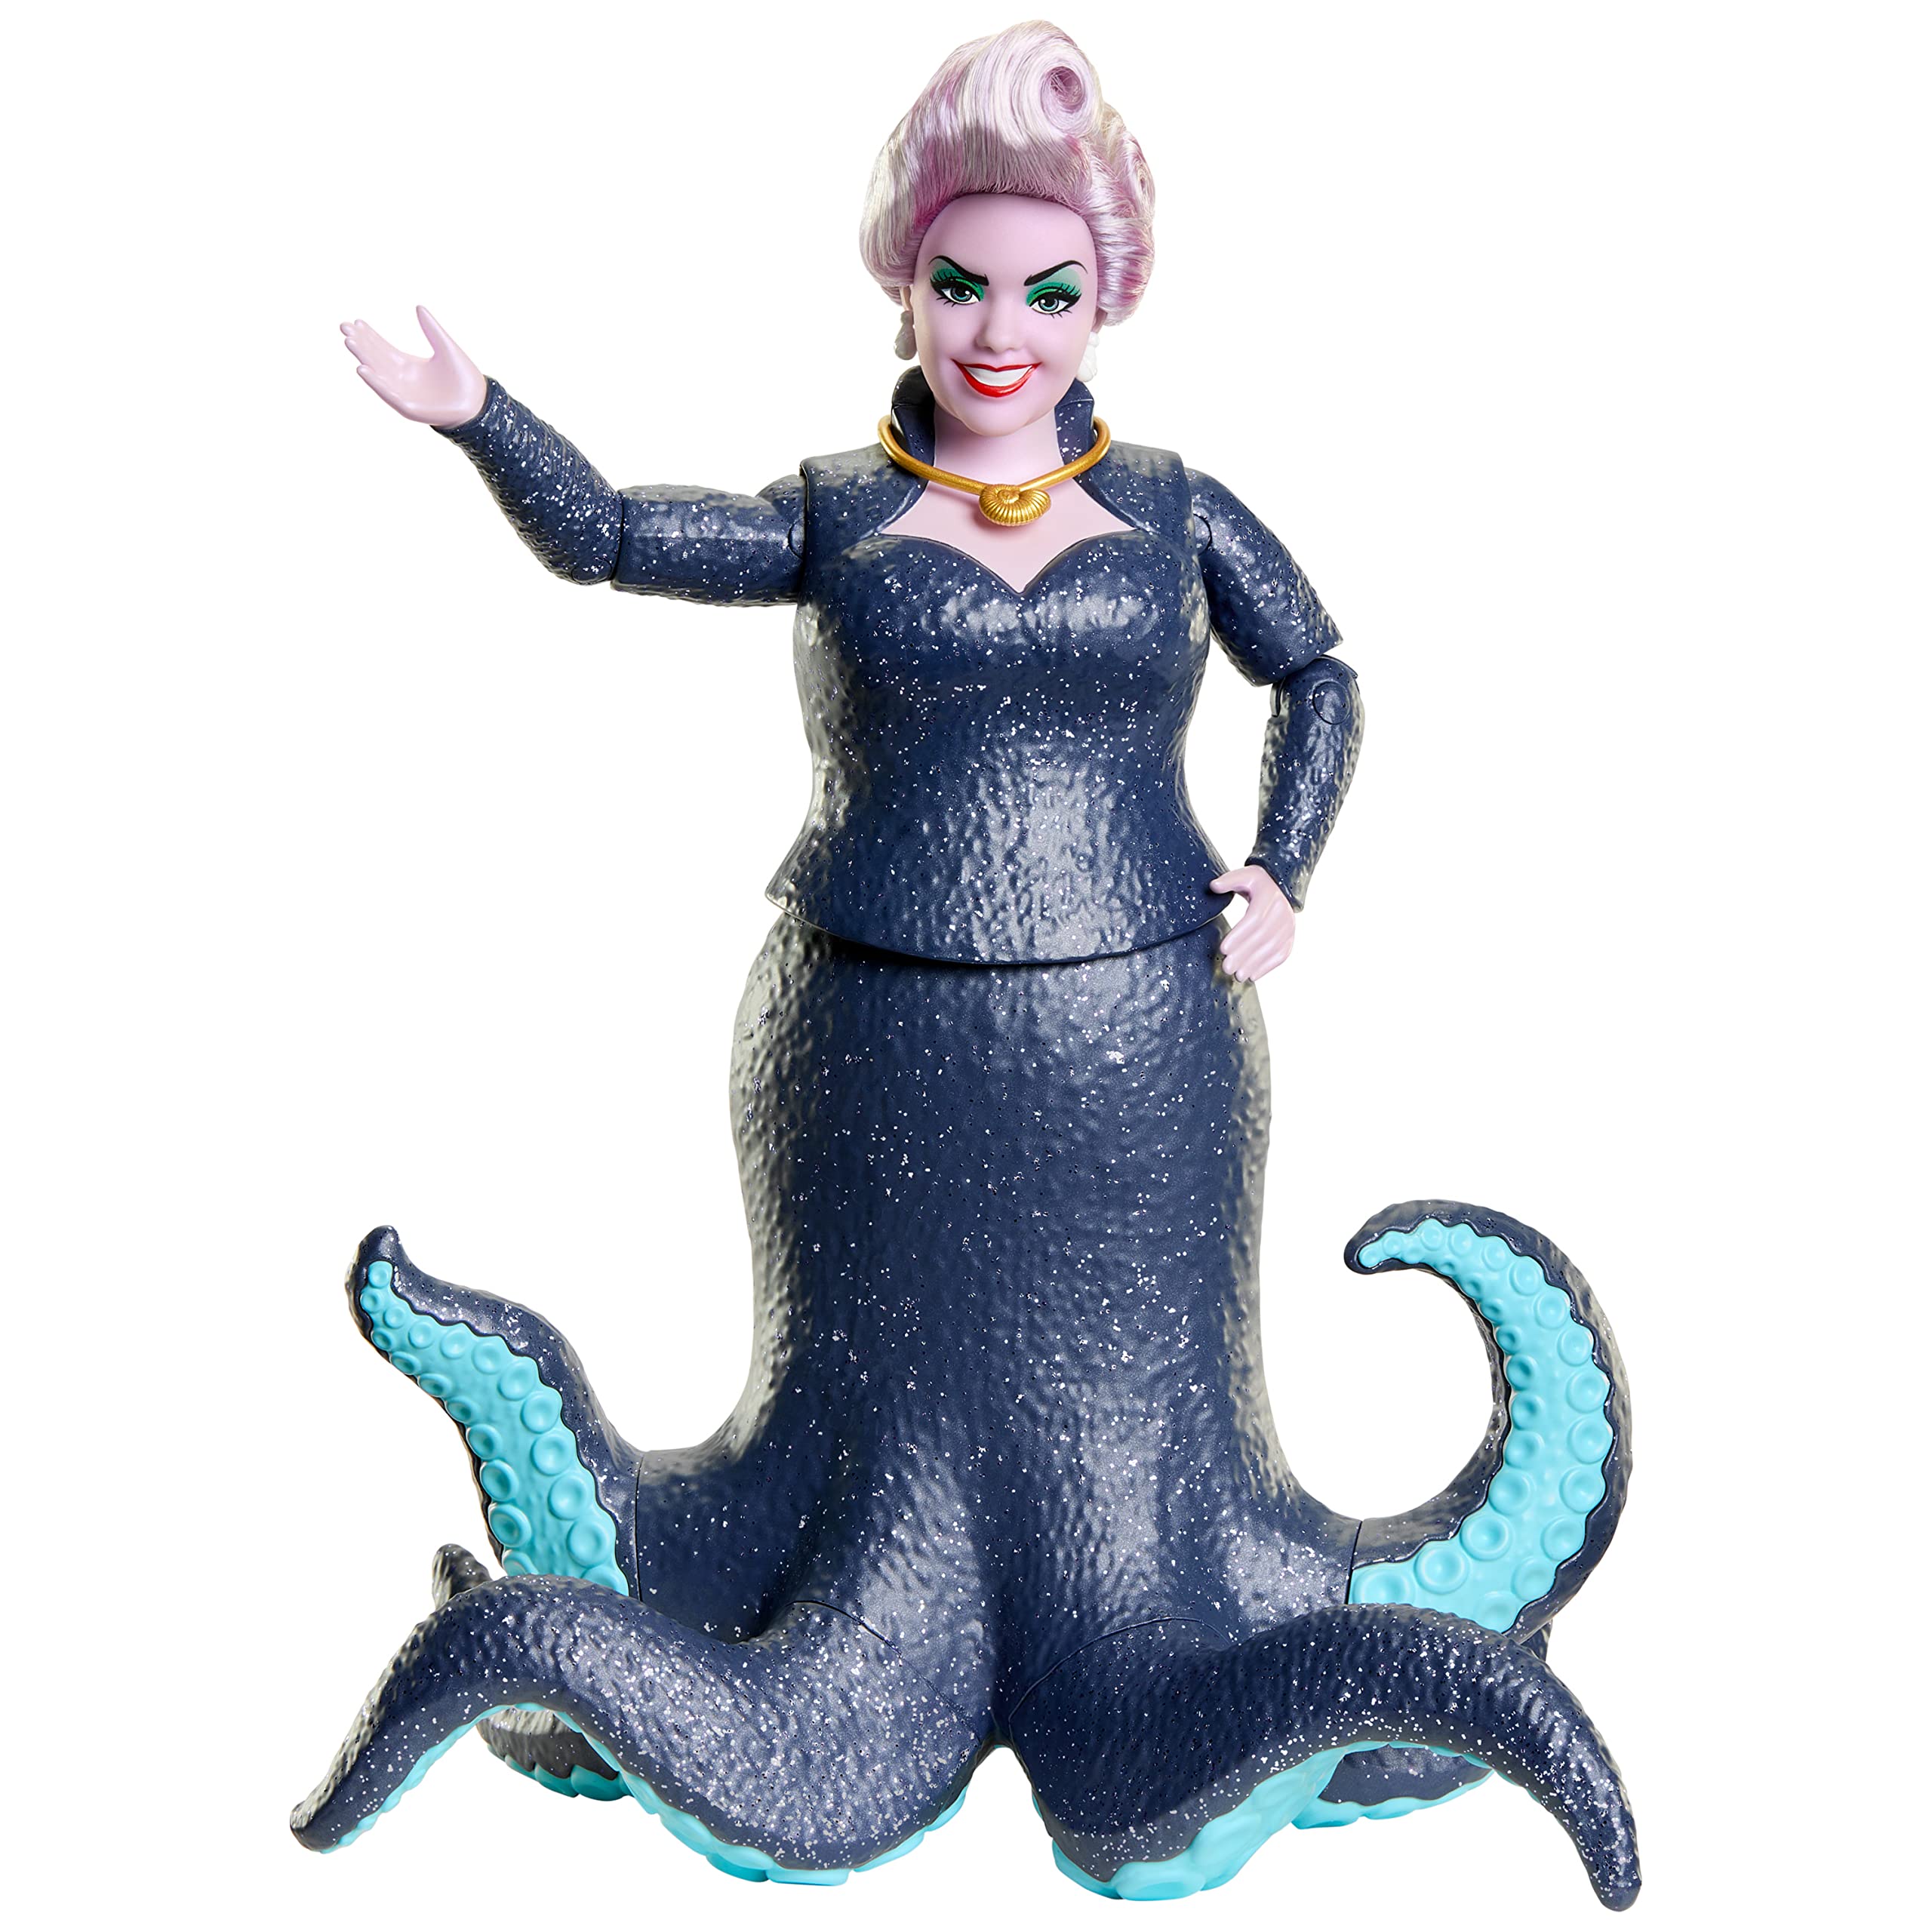 Disney The Little Mermaid Ariel, King Triton & Ursula Dolls, Set of 3 Fashion Dolls in Signature Outfits, Toys Inspired by the Movie (Amazon Exclusive)